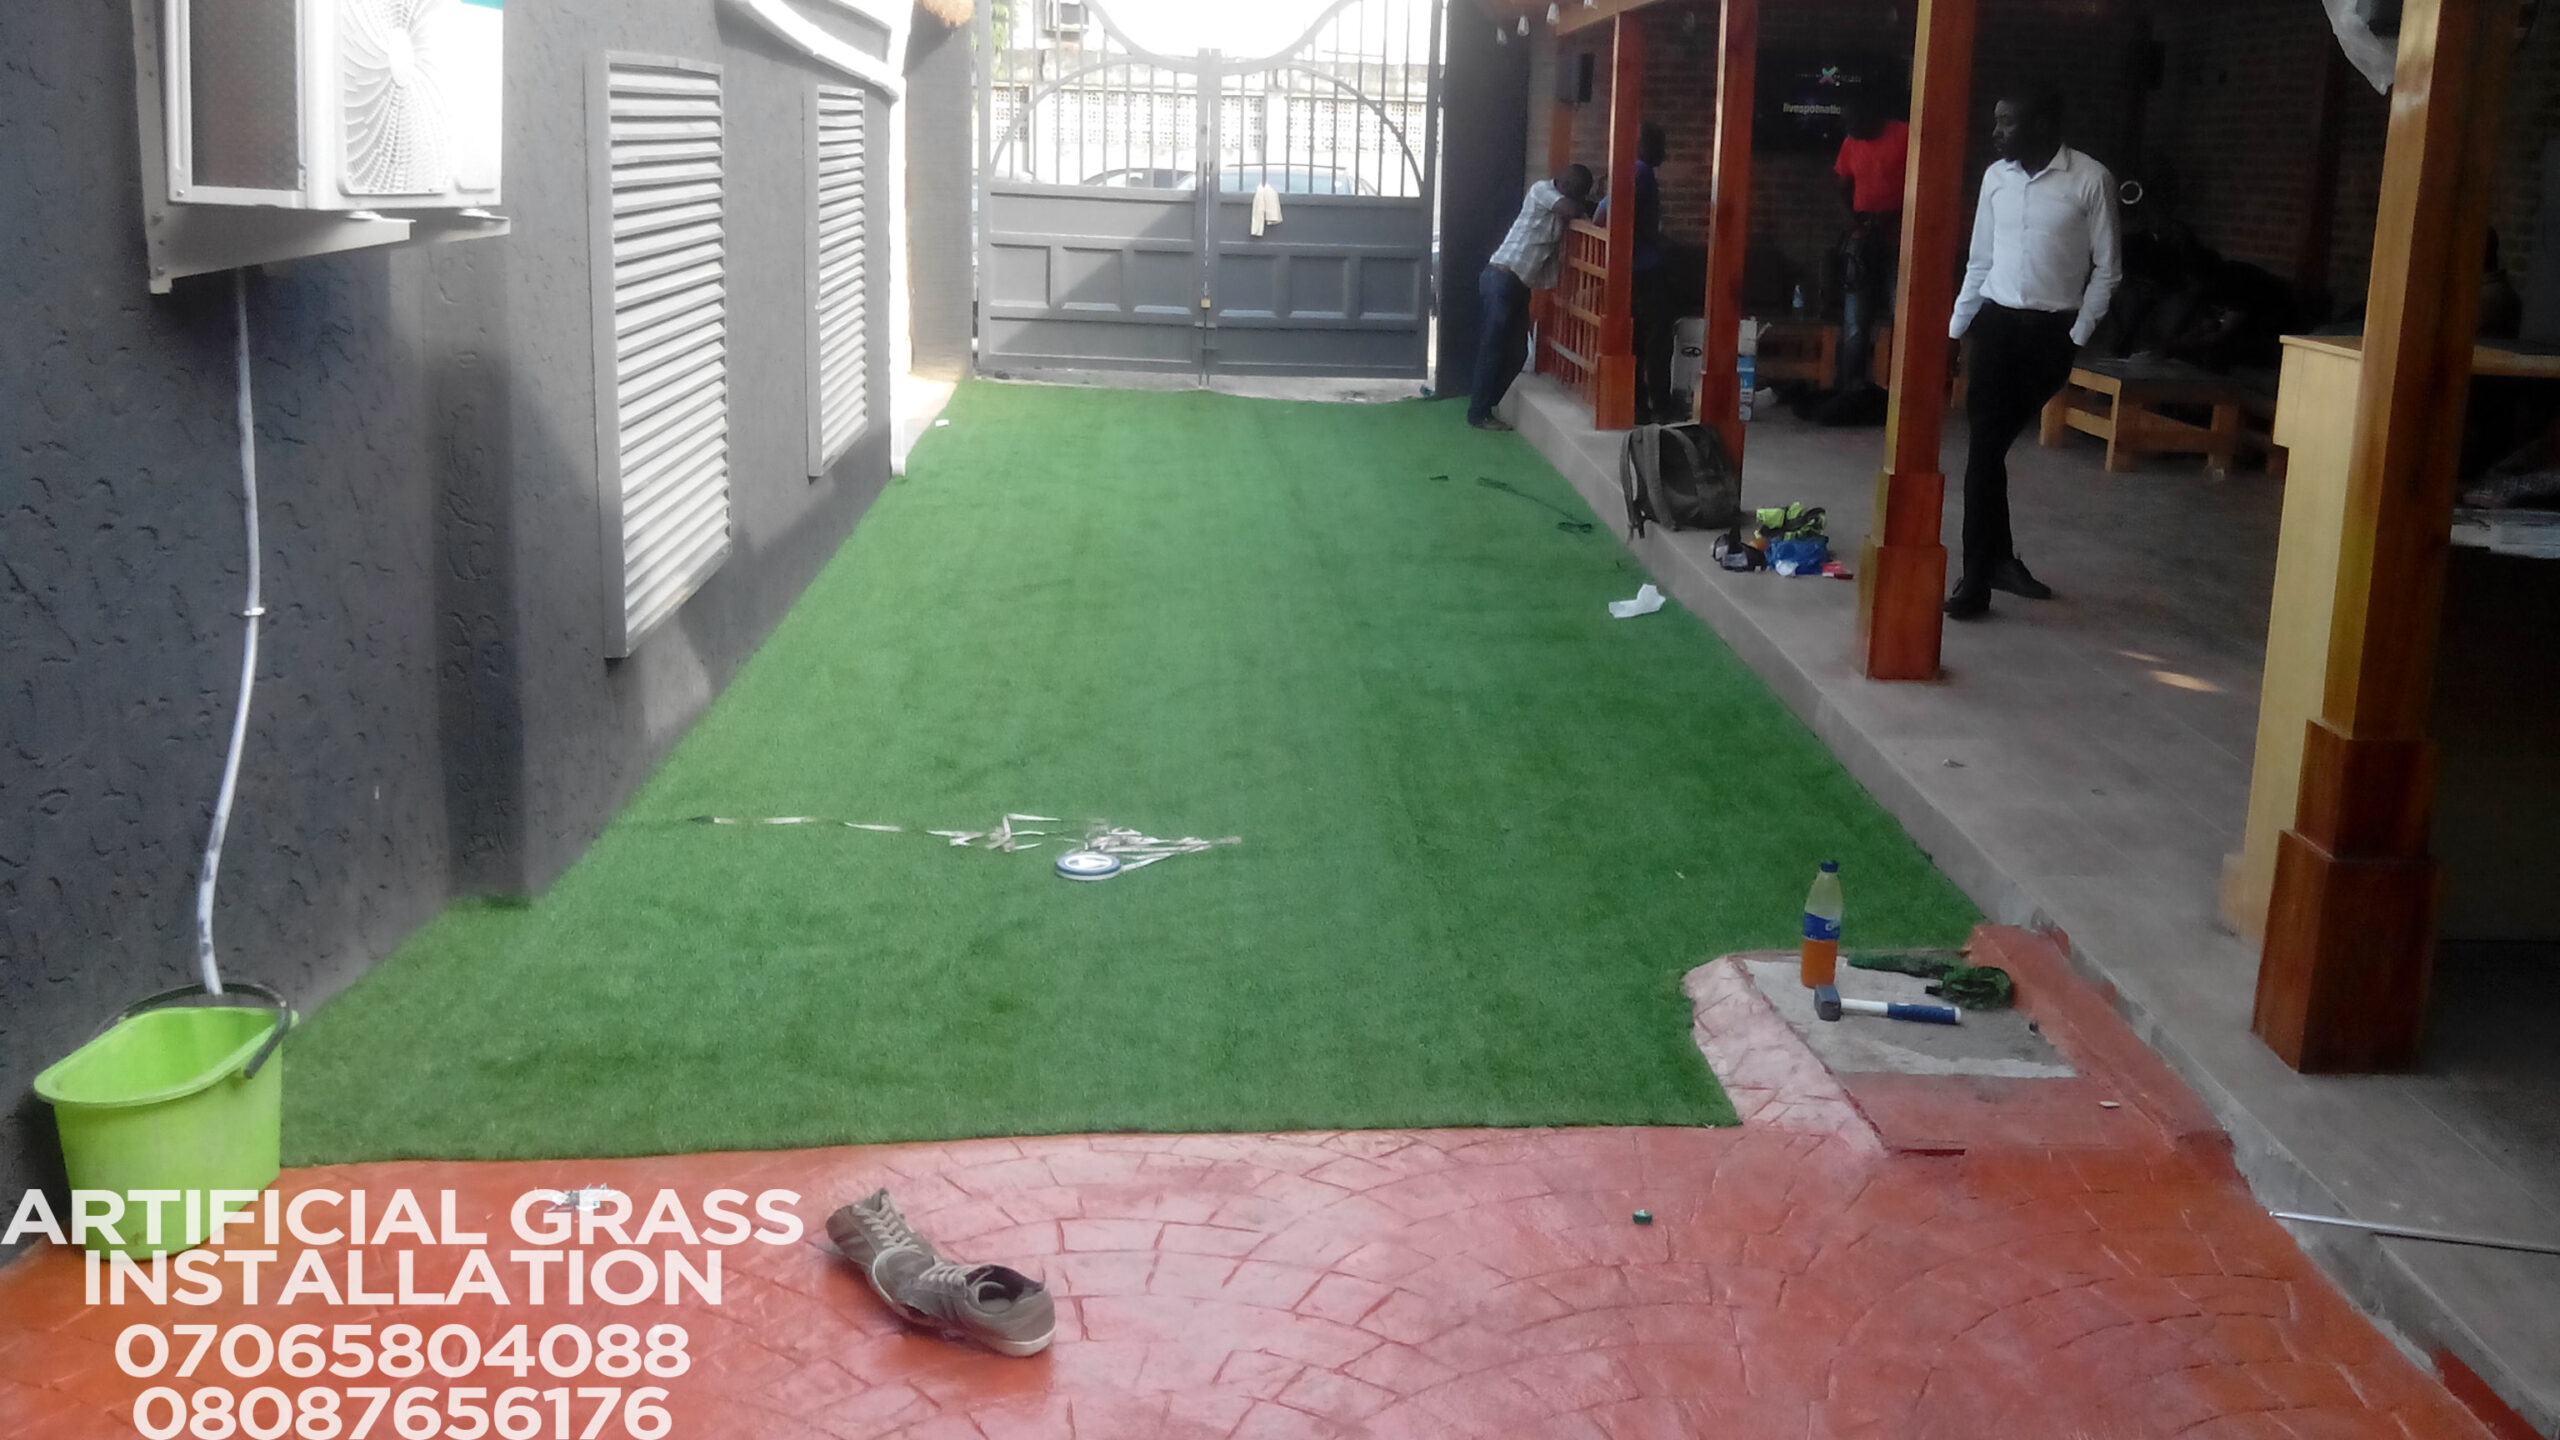 You are currently viewing New Grass Installation At Adeniyi Jones Ikeja Lagos